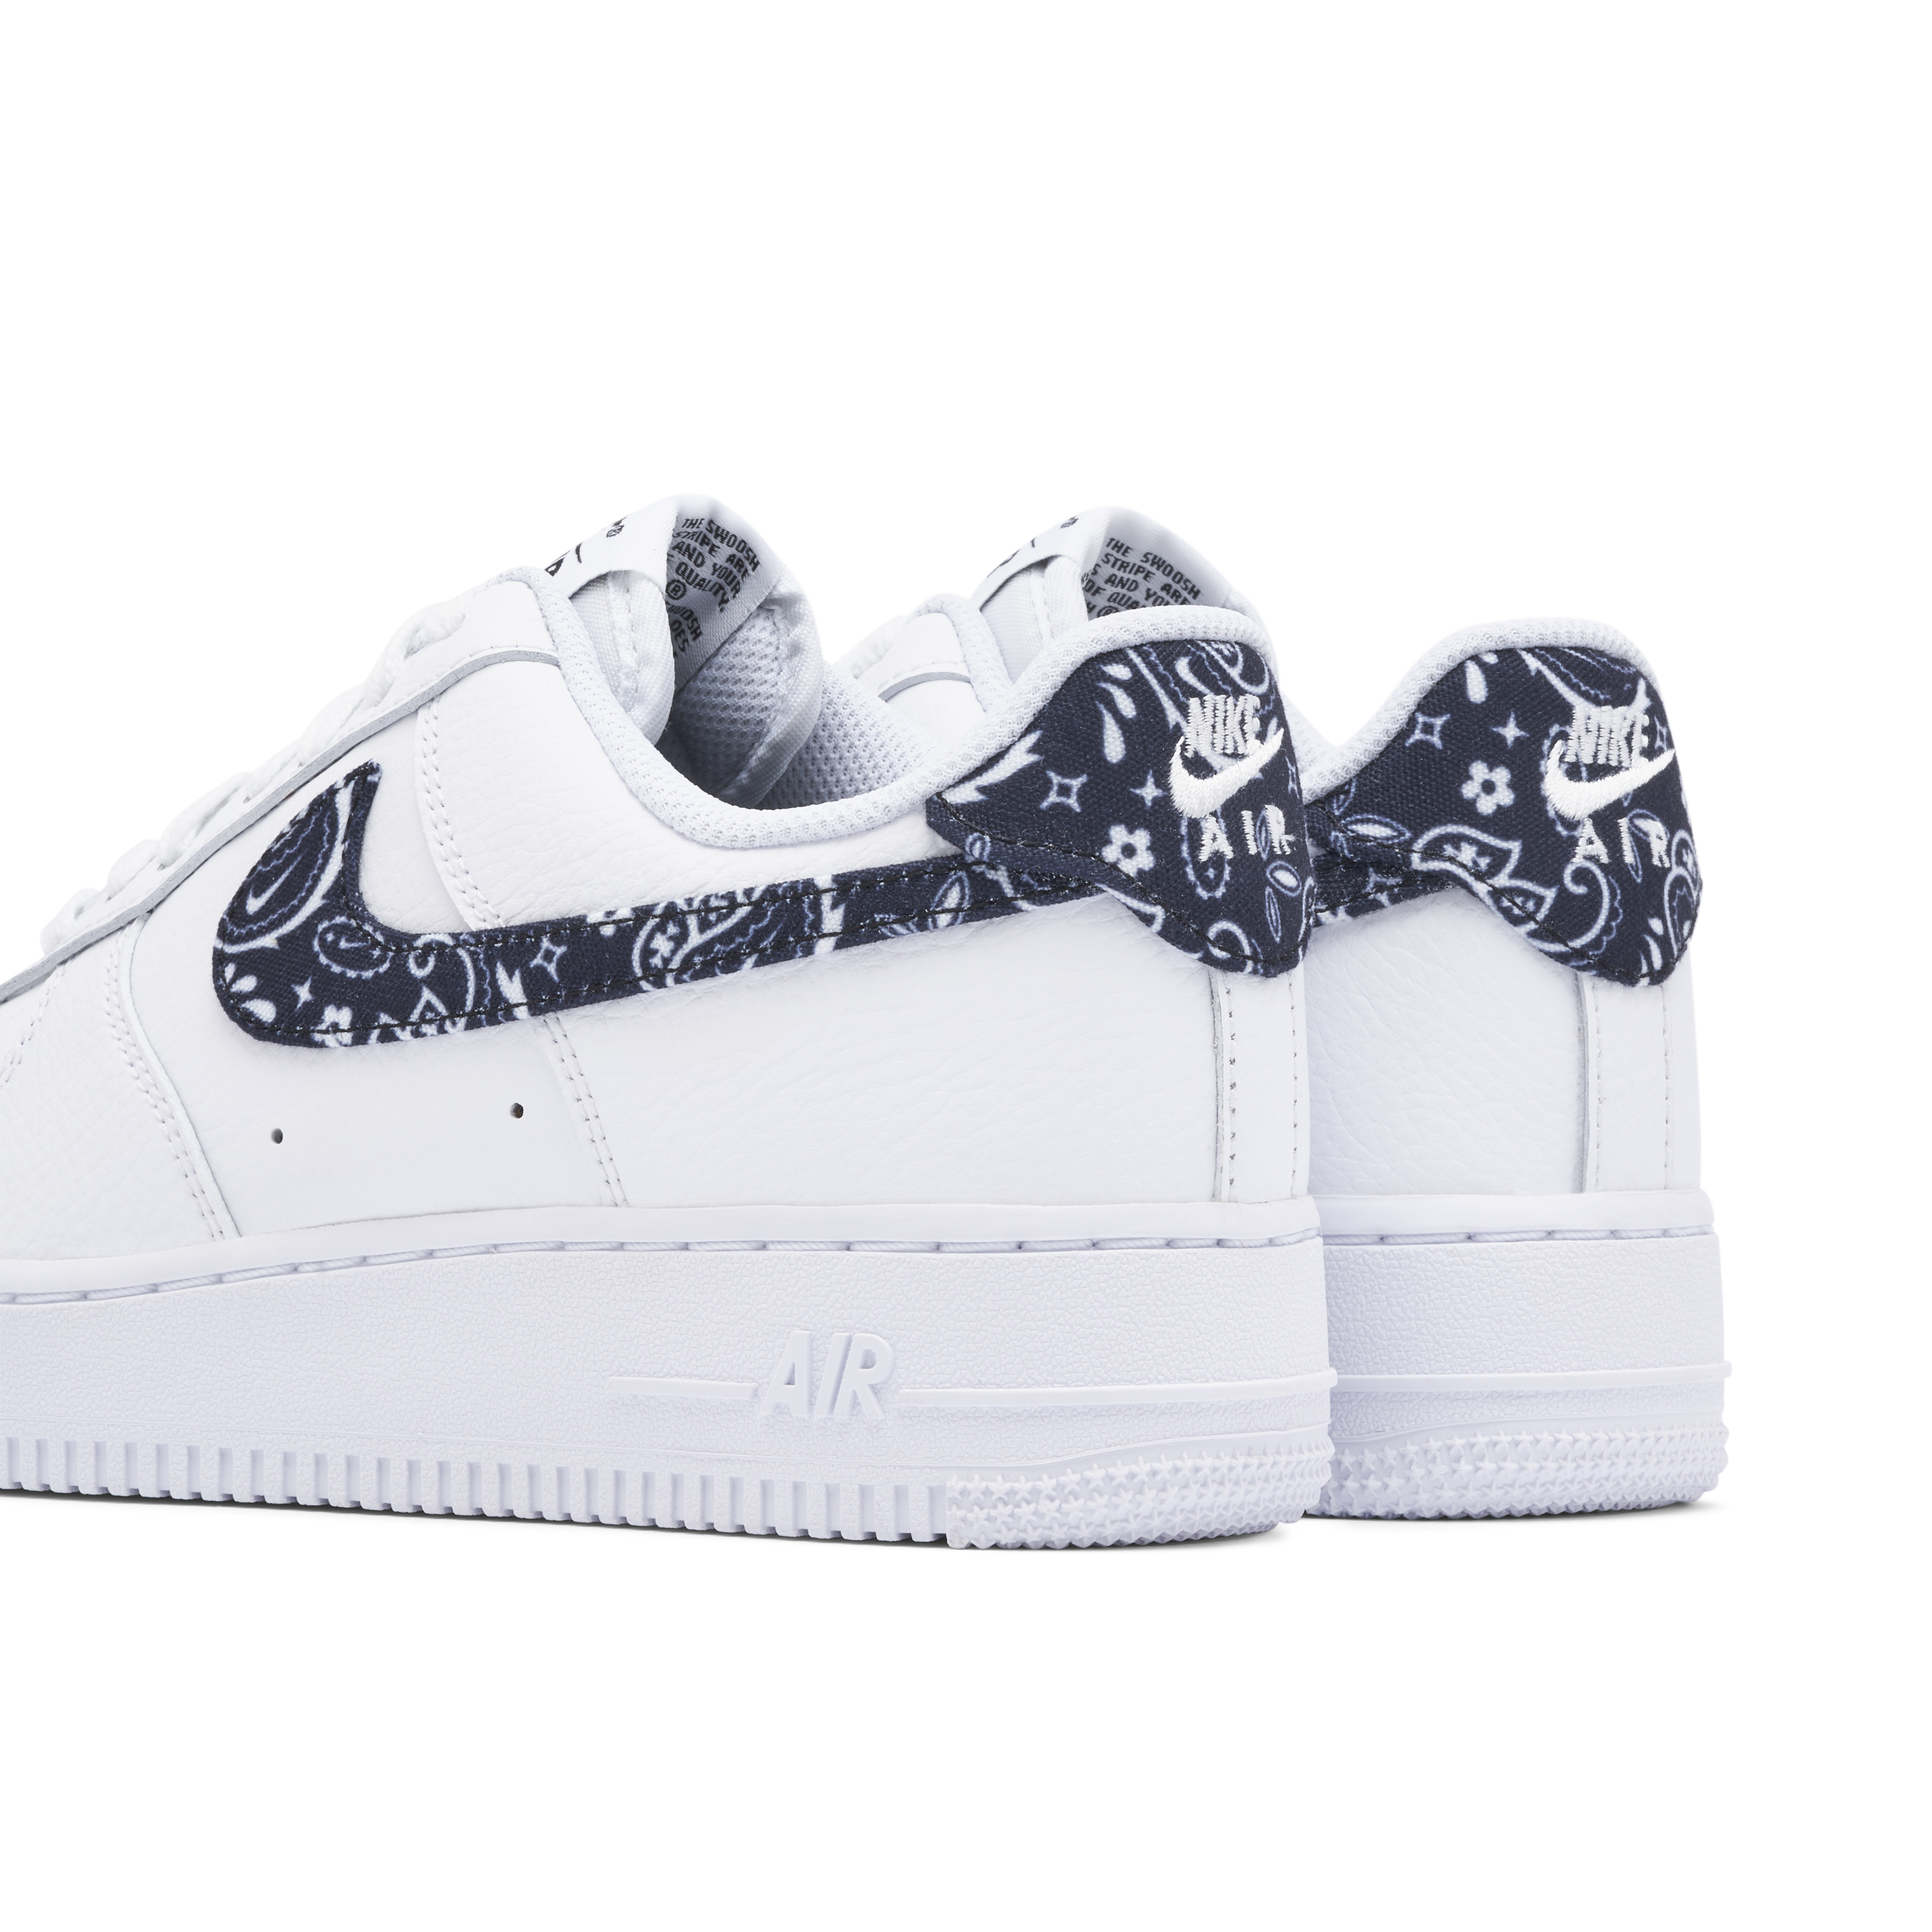 Nike Air Force 1 Low '07 Essential White Black Paisley (Women's)